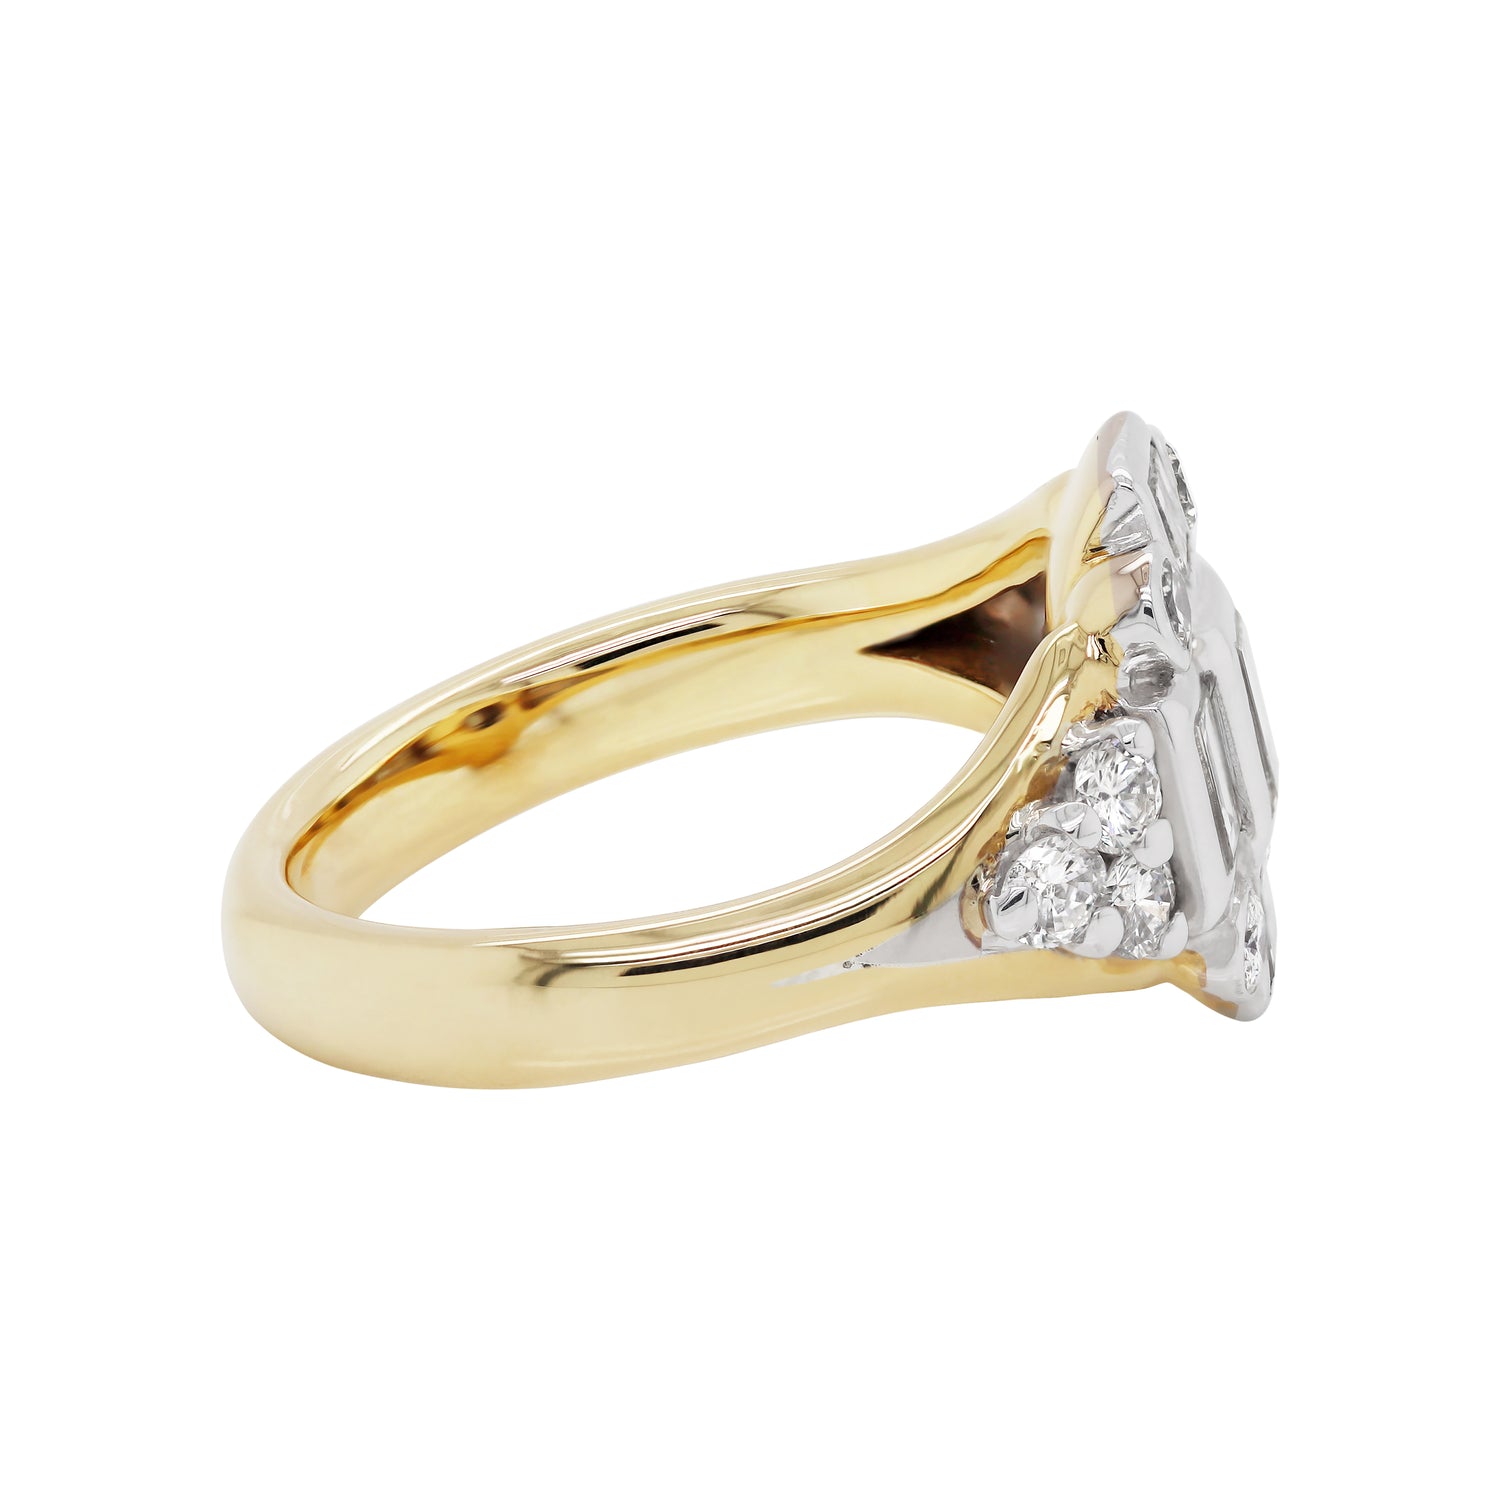 18 Carat Gold Diamond Art Deco Style Cluster Cocktail Ring